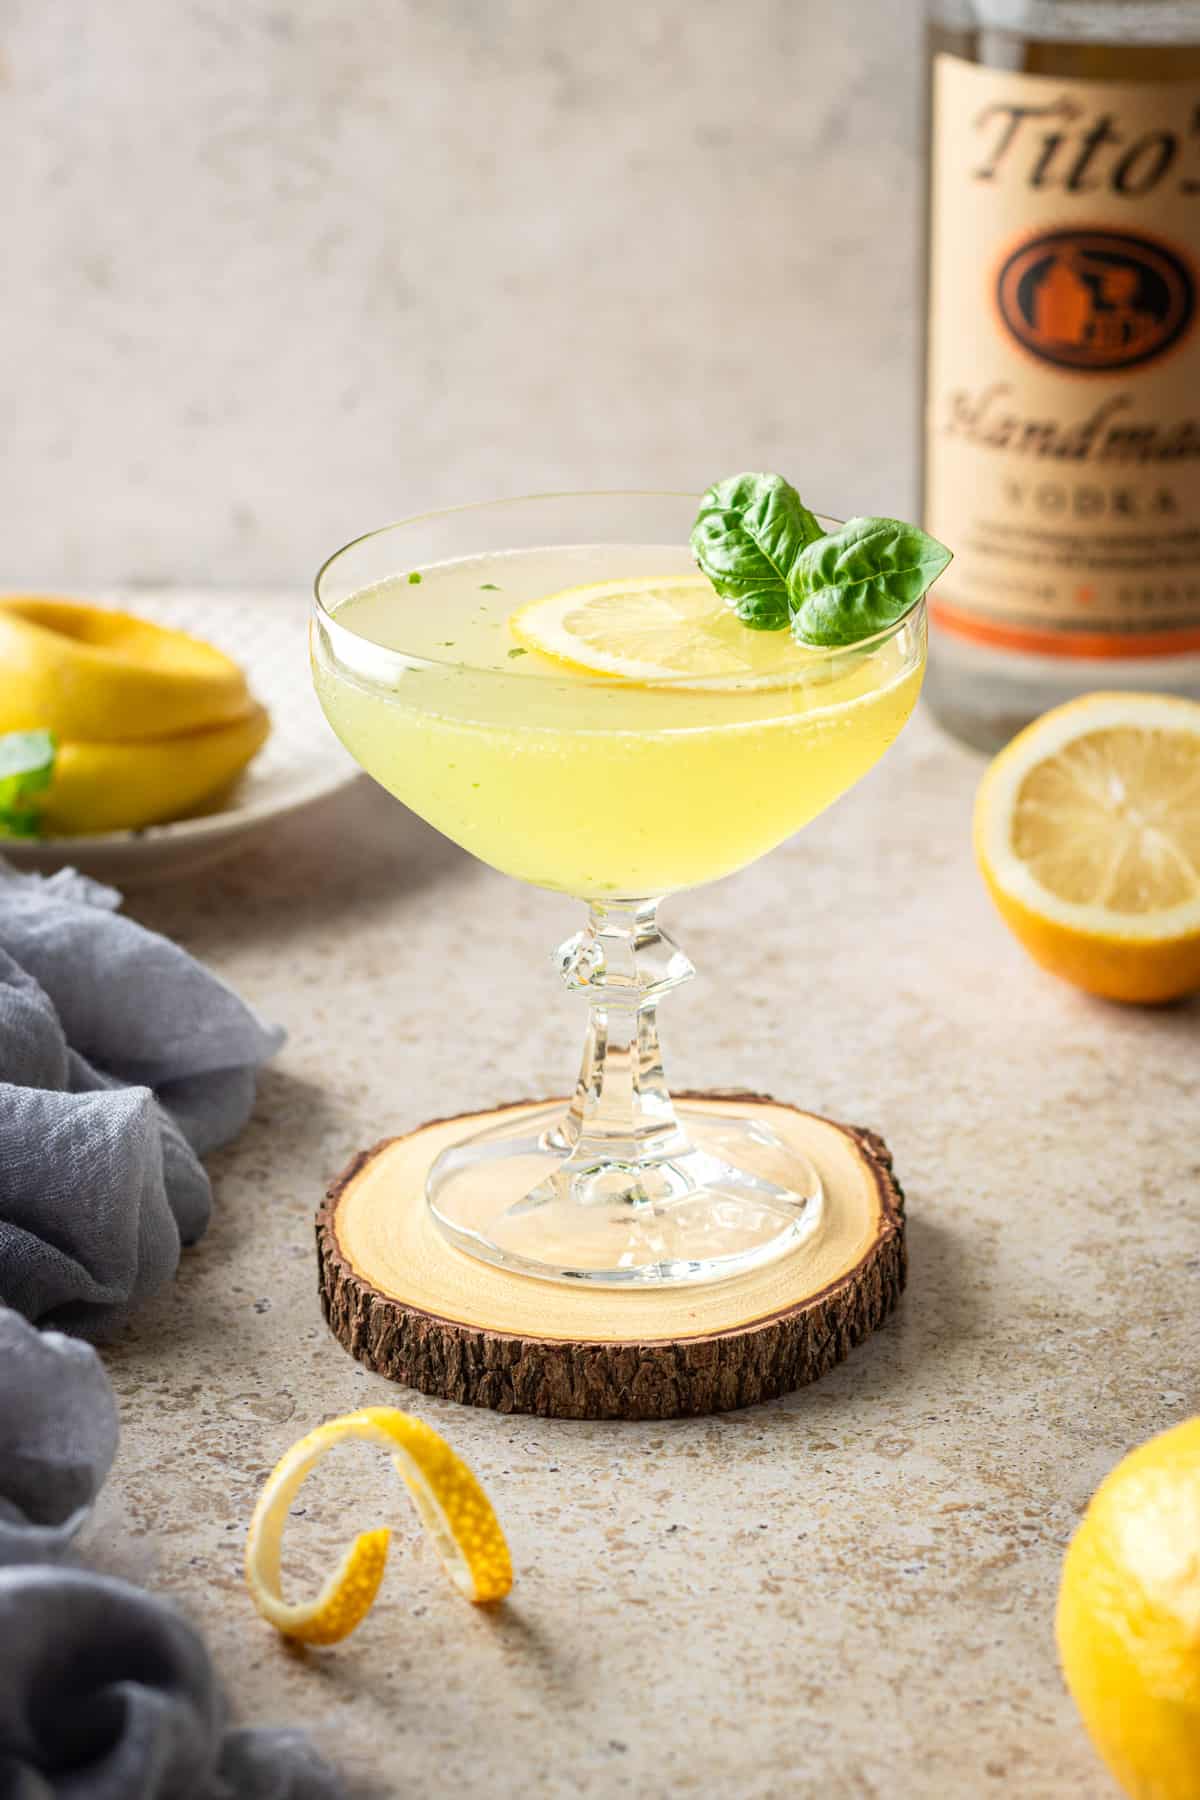 A lemon drop basil martini on a wooden coaster with a bottle of Tito's vodka in the background garnished with basil and lemons.